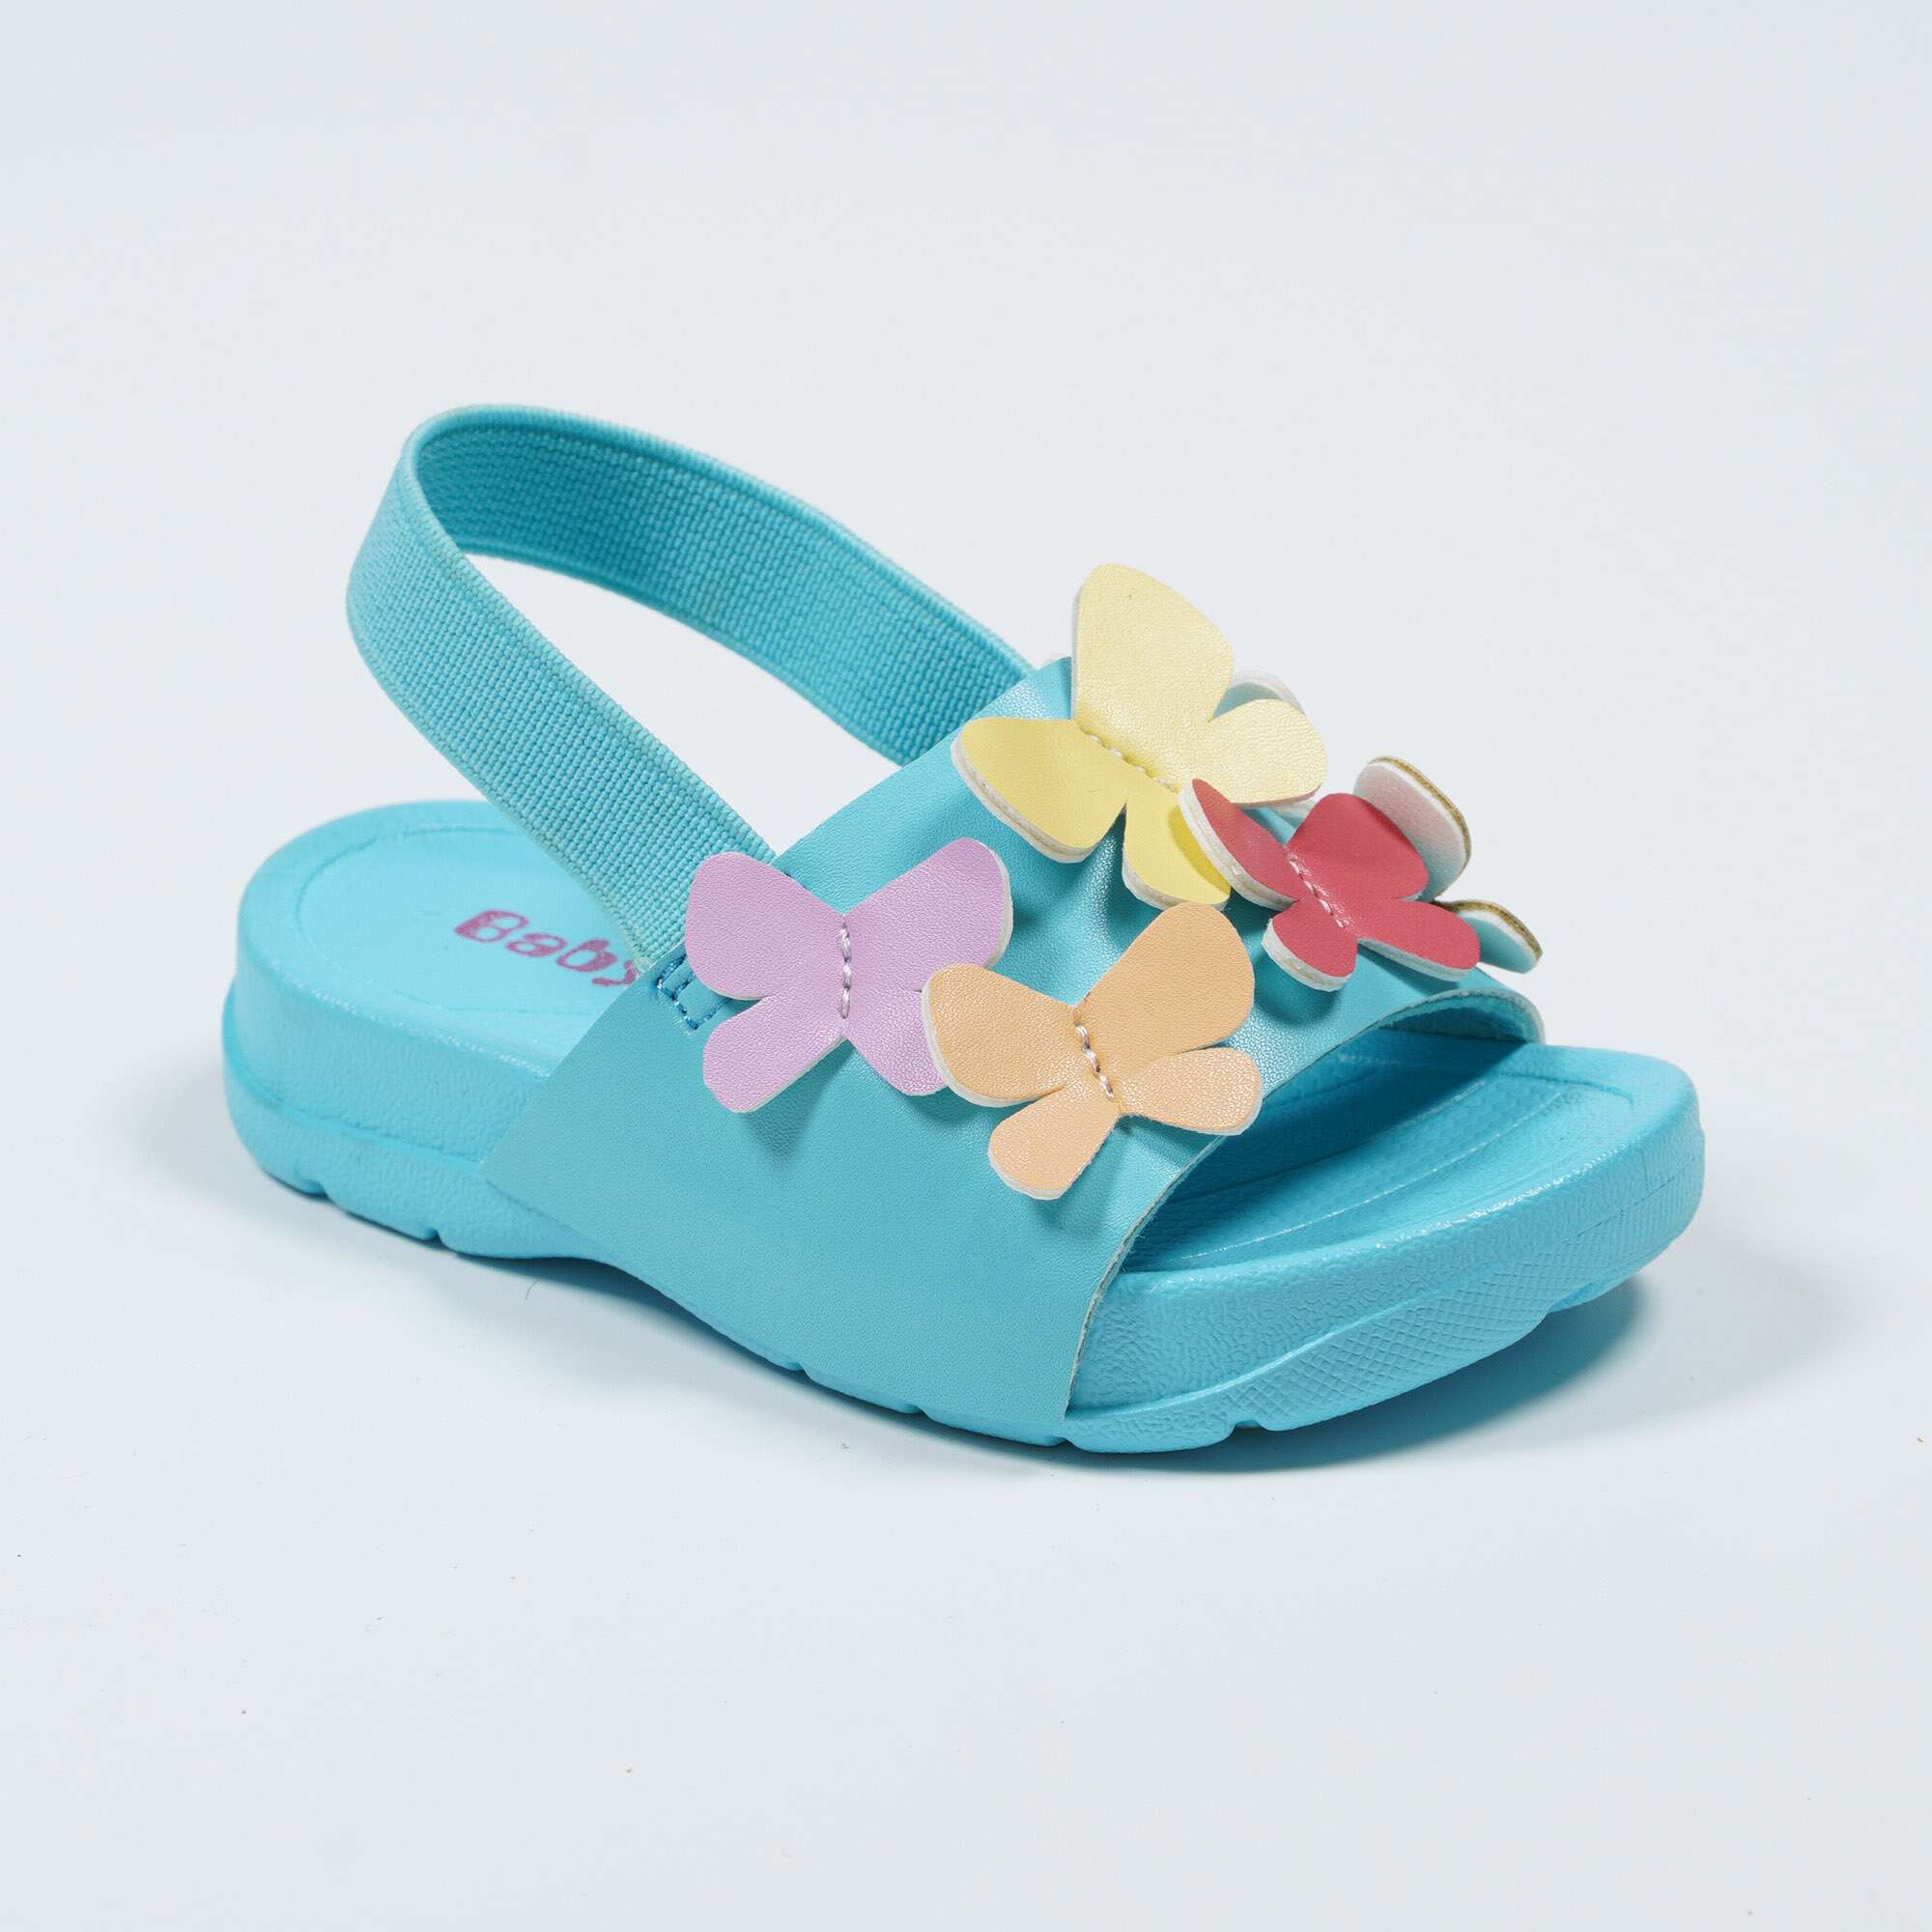 Nikoofly-Colorful-Butterfly-Baby-Slipper-Sandals-YDX2311F-3-sky-blue